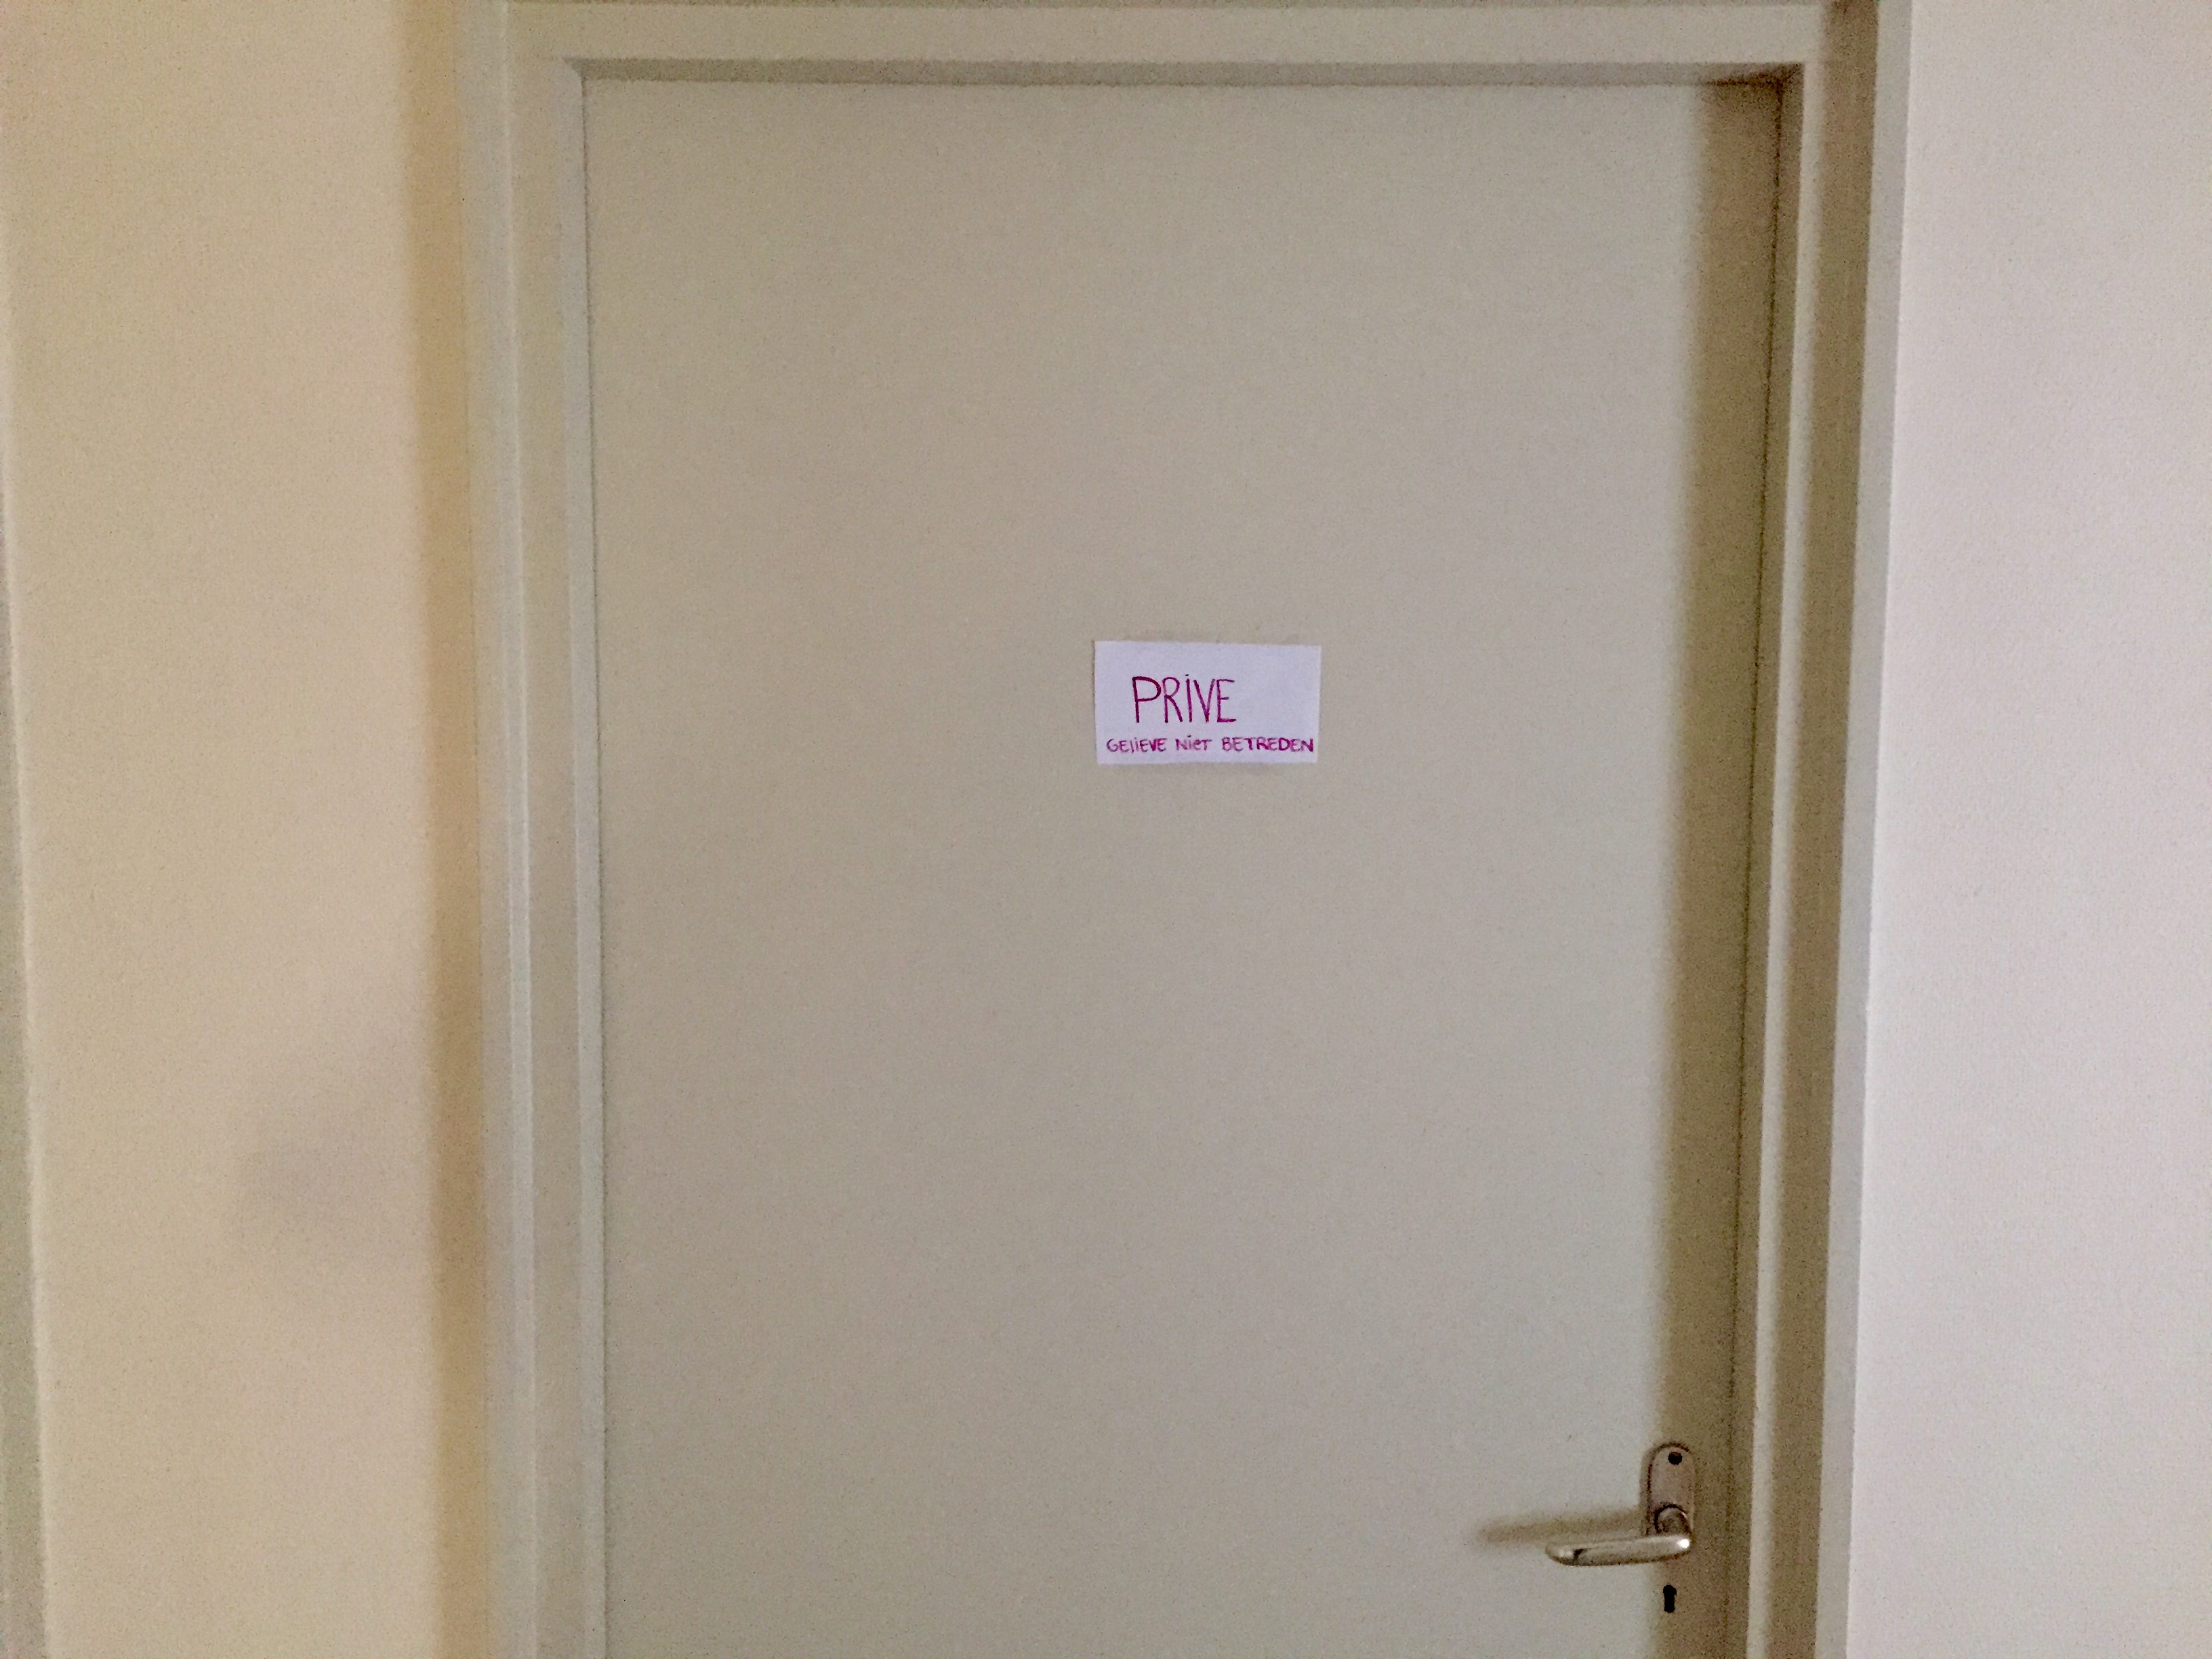 The bedroom door, with a note that says “Please do not enter"